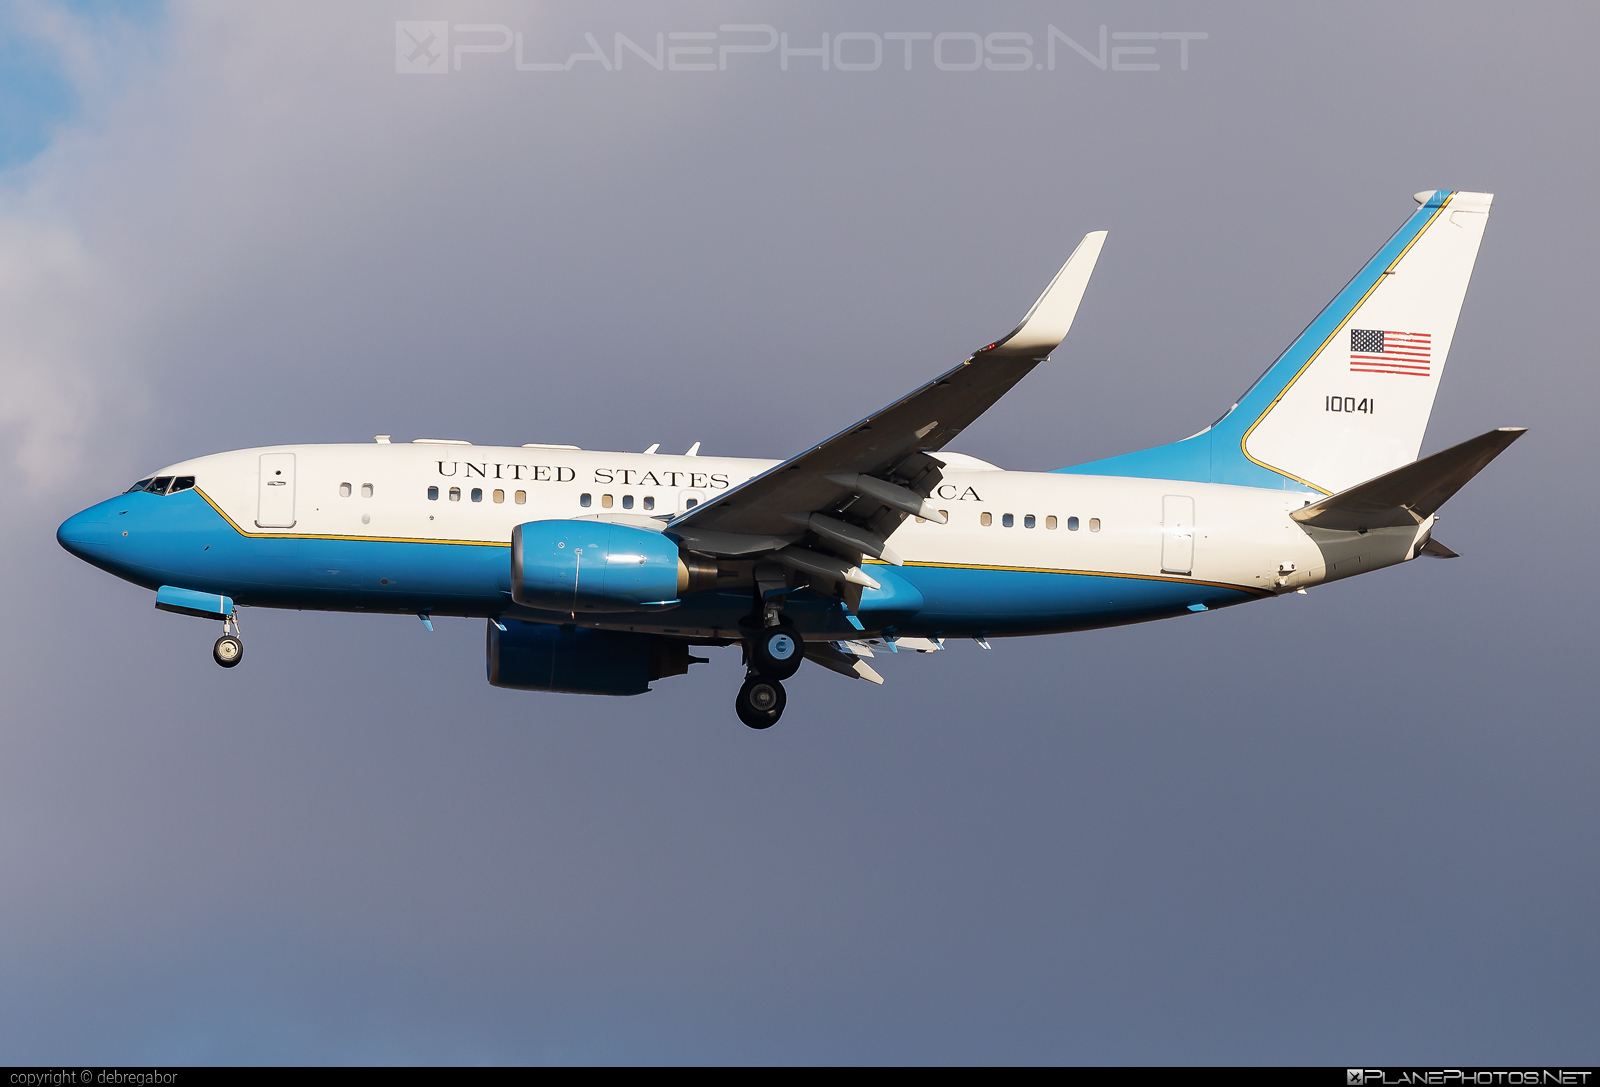 Boeing C-40B - 01-0041 operated by US Air Force (USAF) #b737 #boeing #boeingc40 #boeingc40b #c40 #c40b #usaf #usairforce